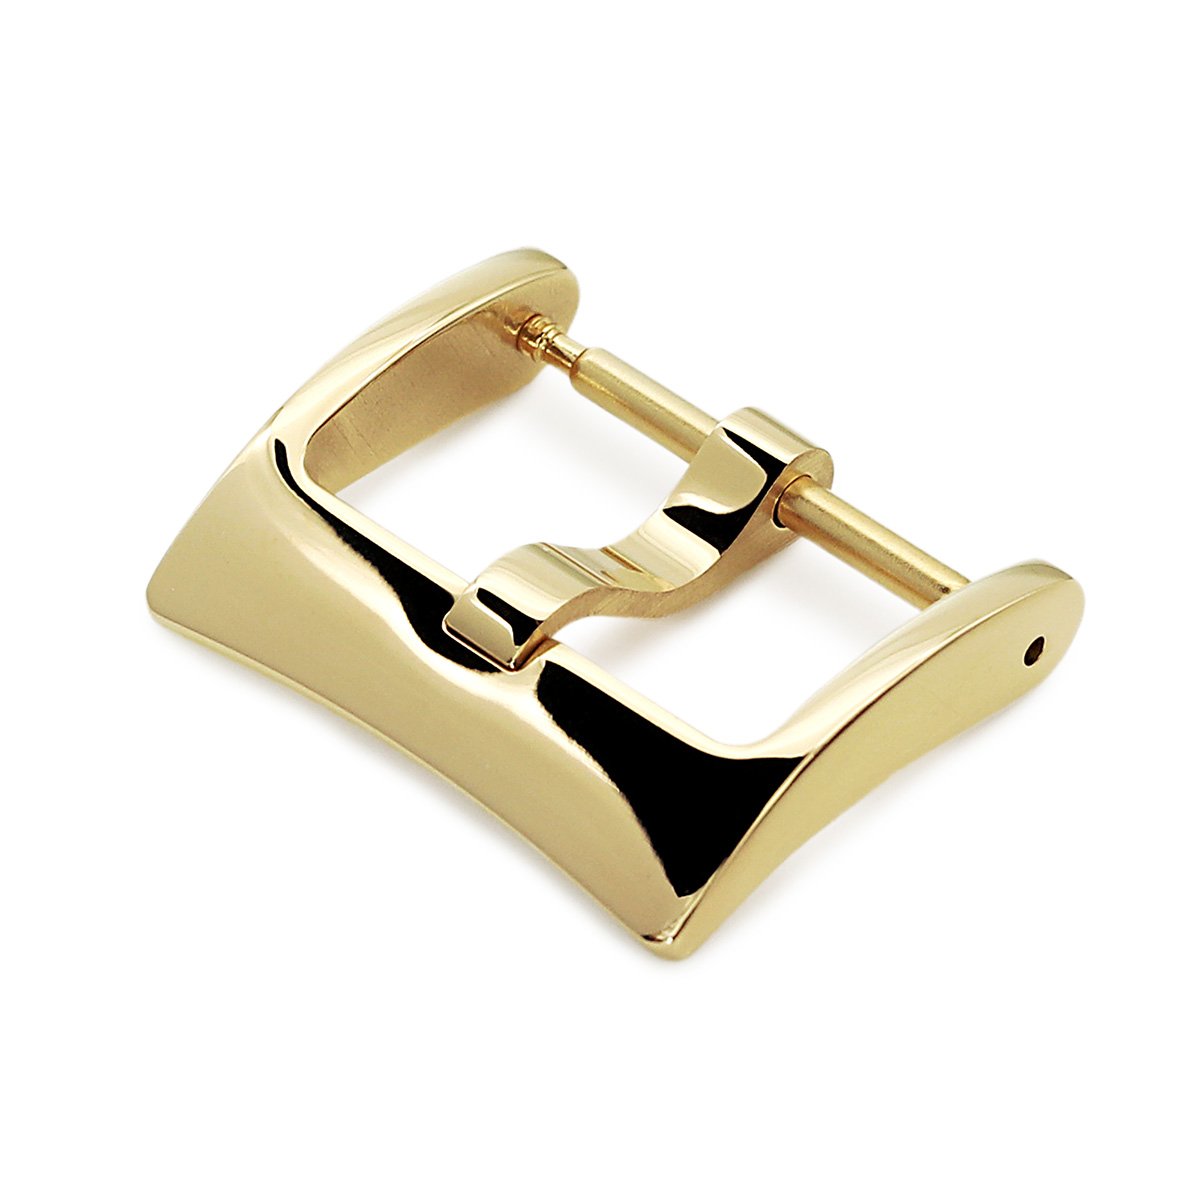 16mm 18mm 20mm #65 Classic Tang Buckle for Leather Watch Strap Polished IP Gold Strapcode Buckles